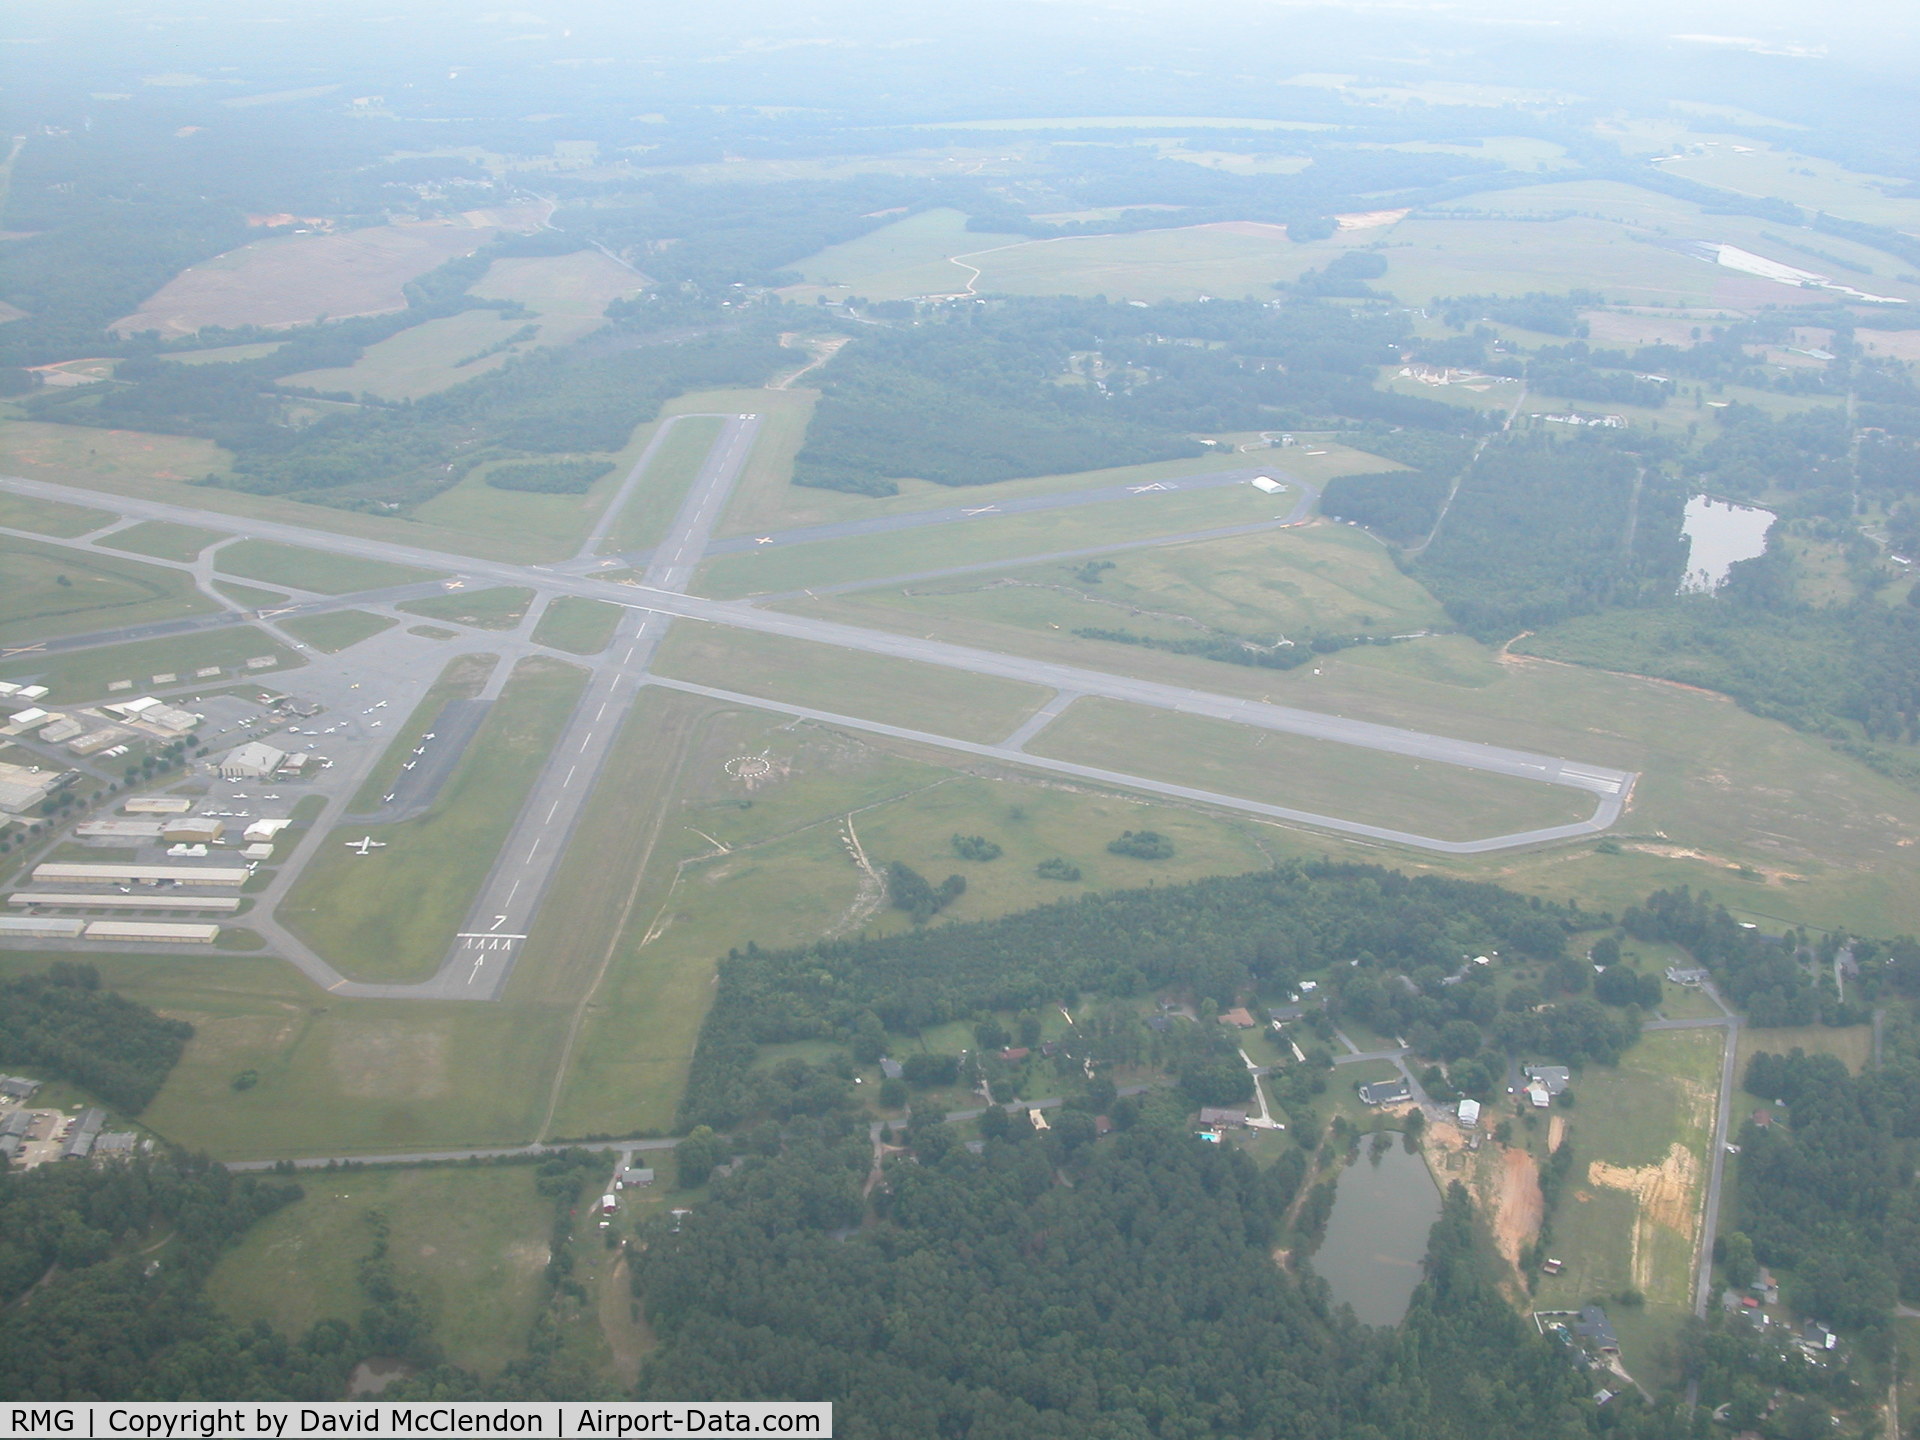 Richard B Russell Airport (RMG) - in the pattern for rwy 01